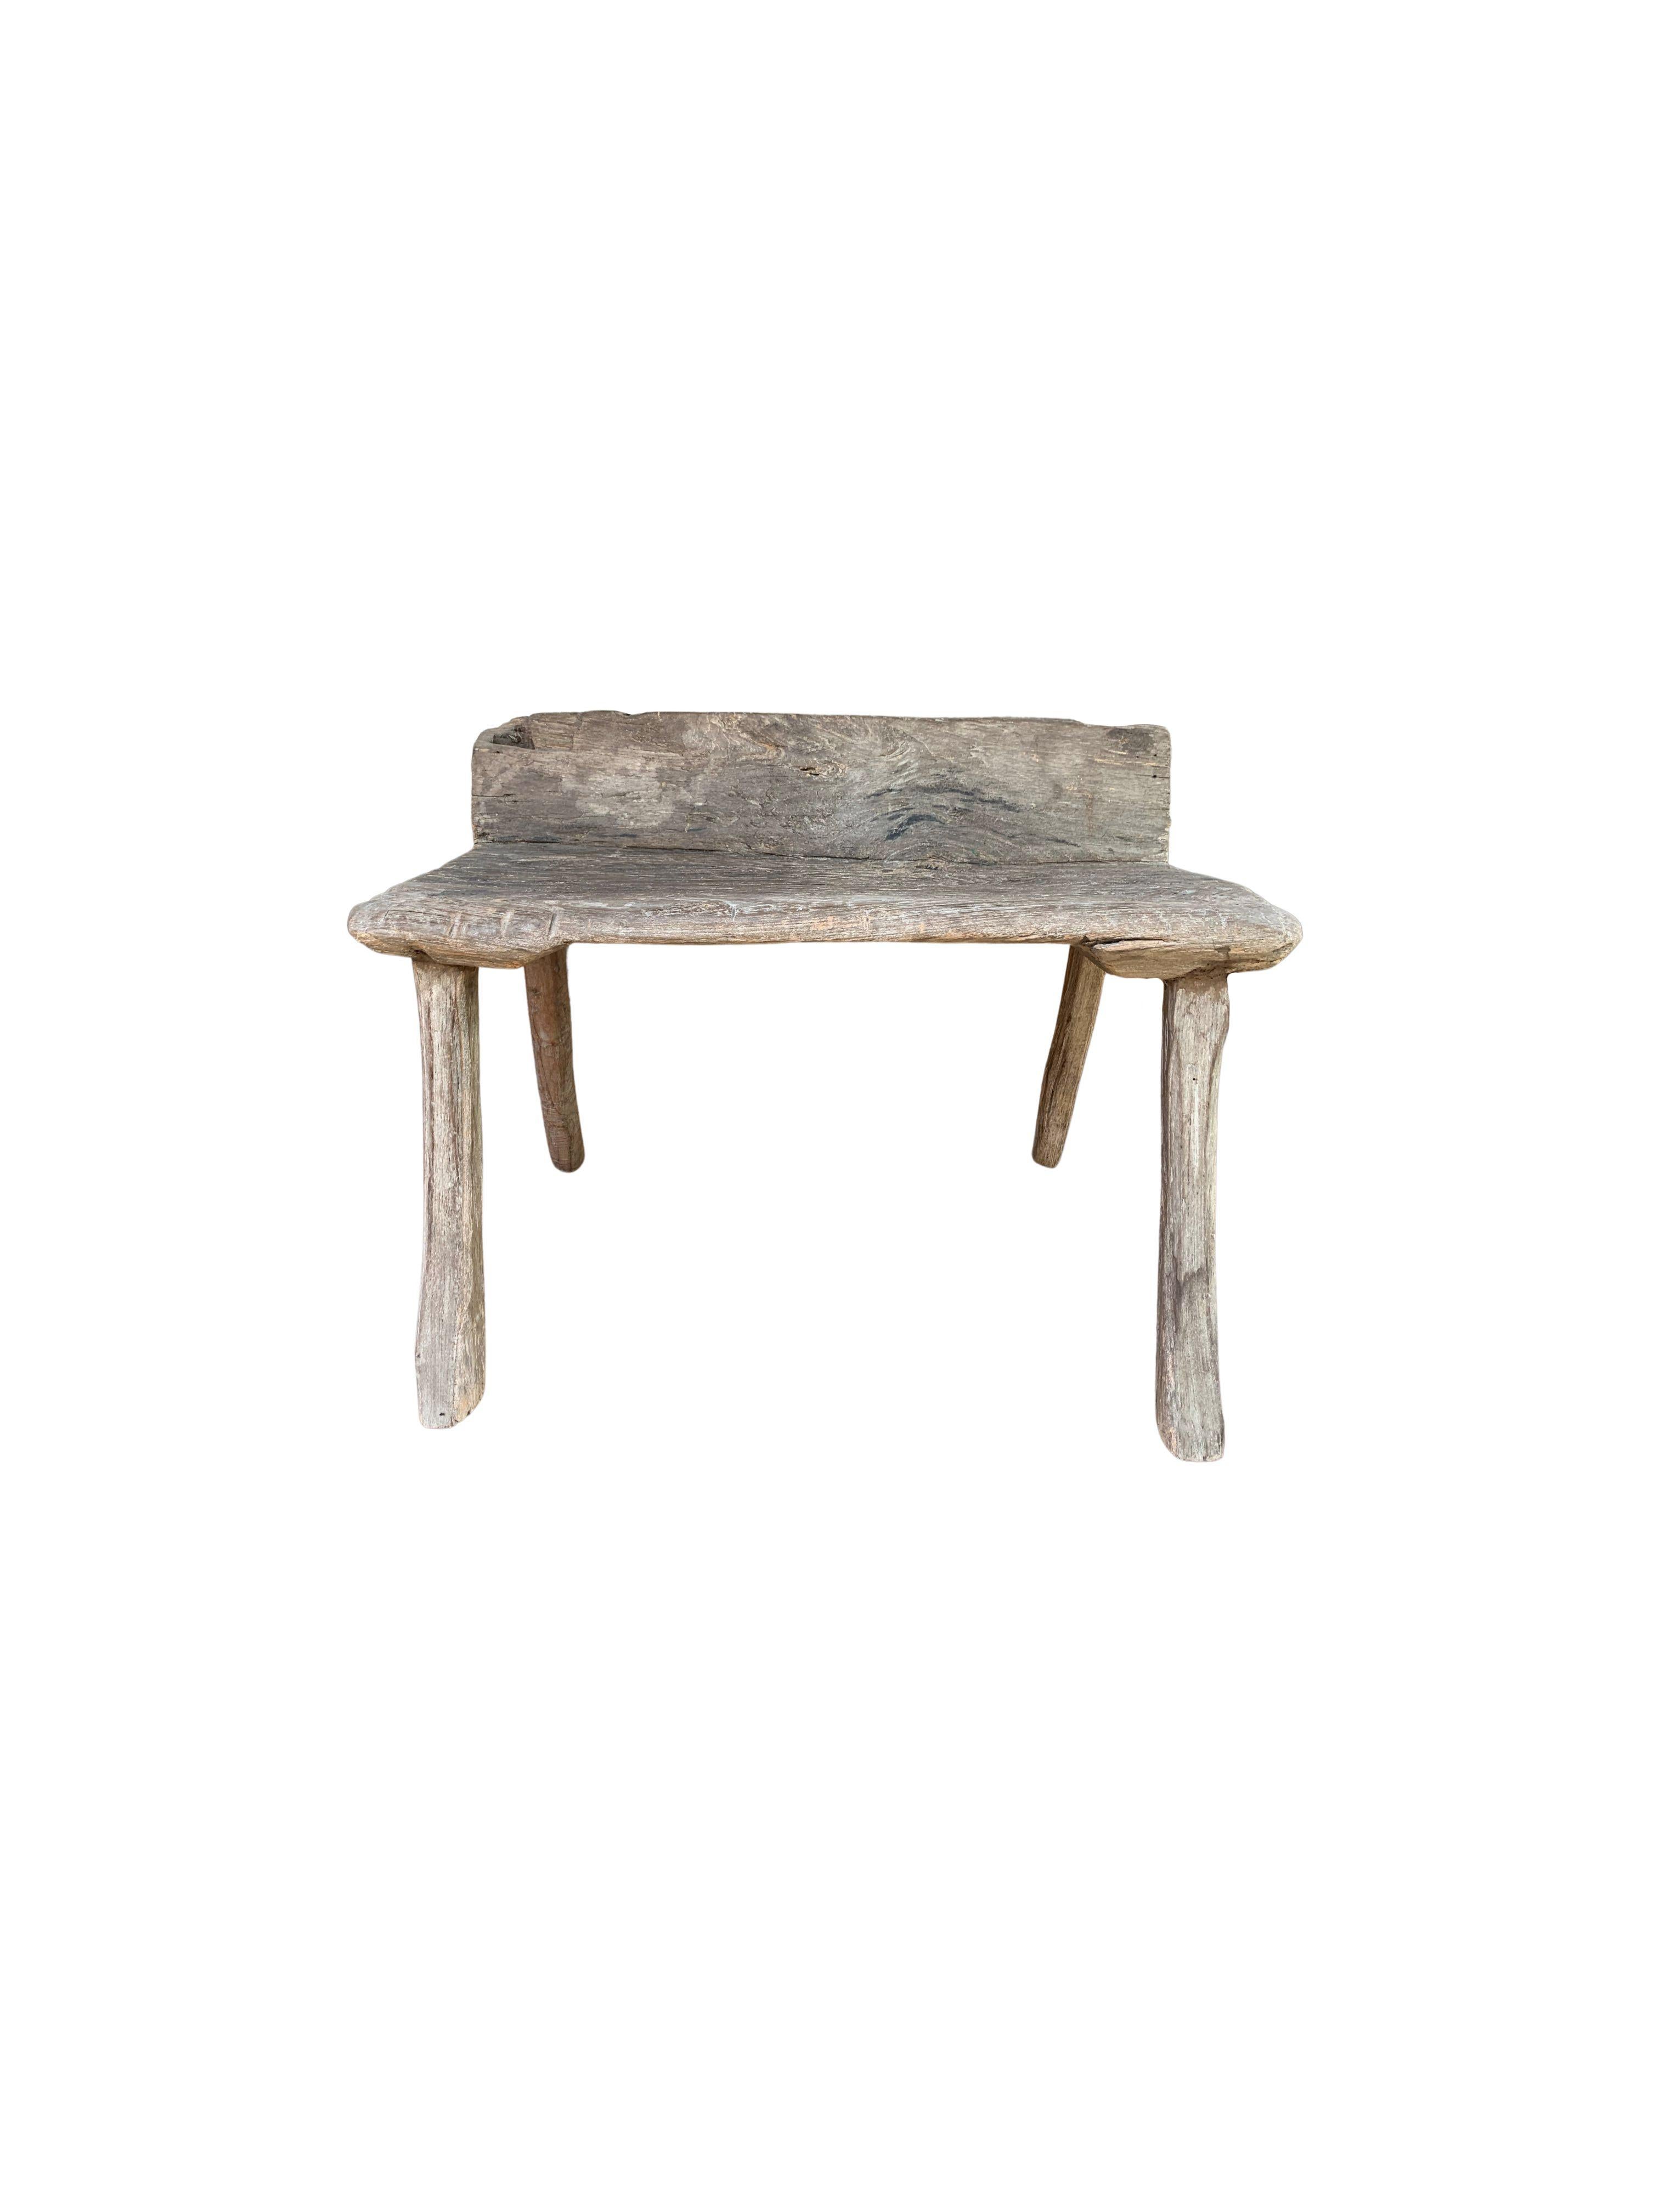 A rustic teak wood stool from the Island of Madura off the Northeastern coast of Java, Indonesia. A wonderfully sculptural object with curved feet and wonderful wood textures and shades. The age-related patina that has formed over the decades adds